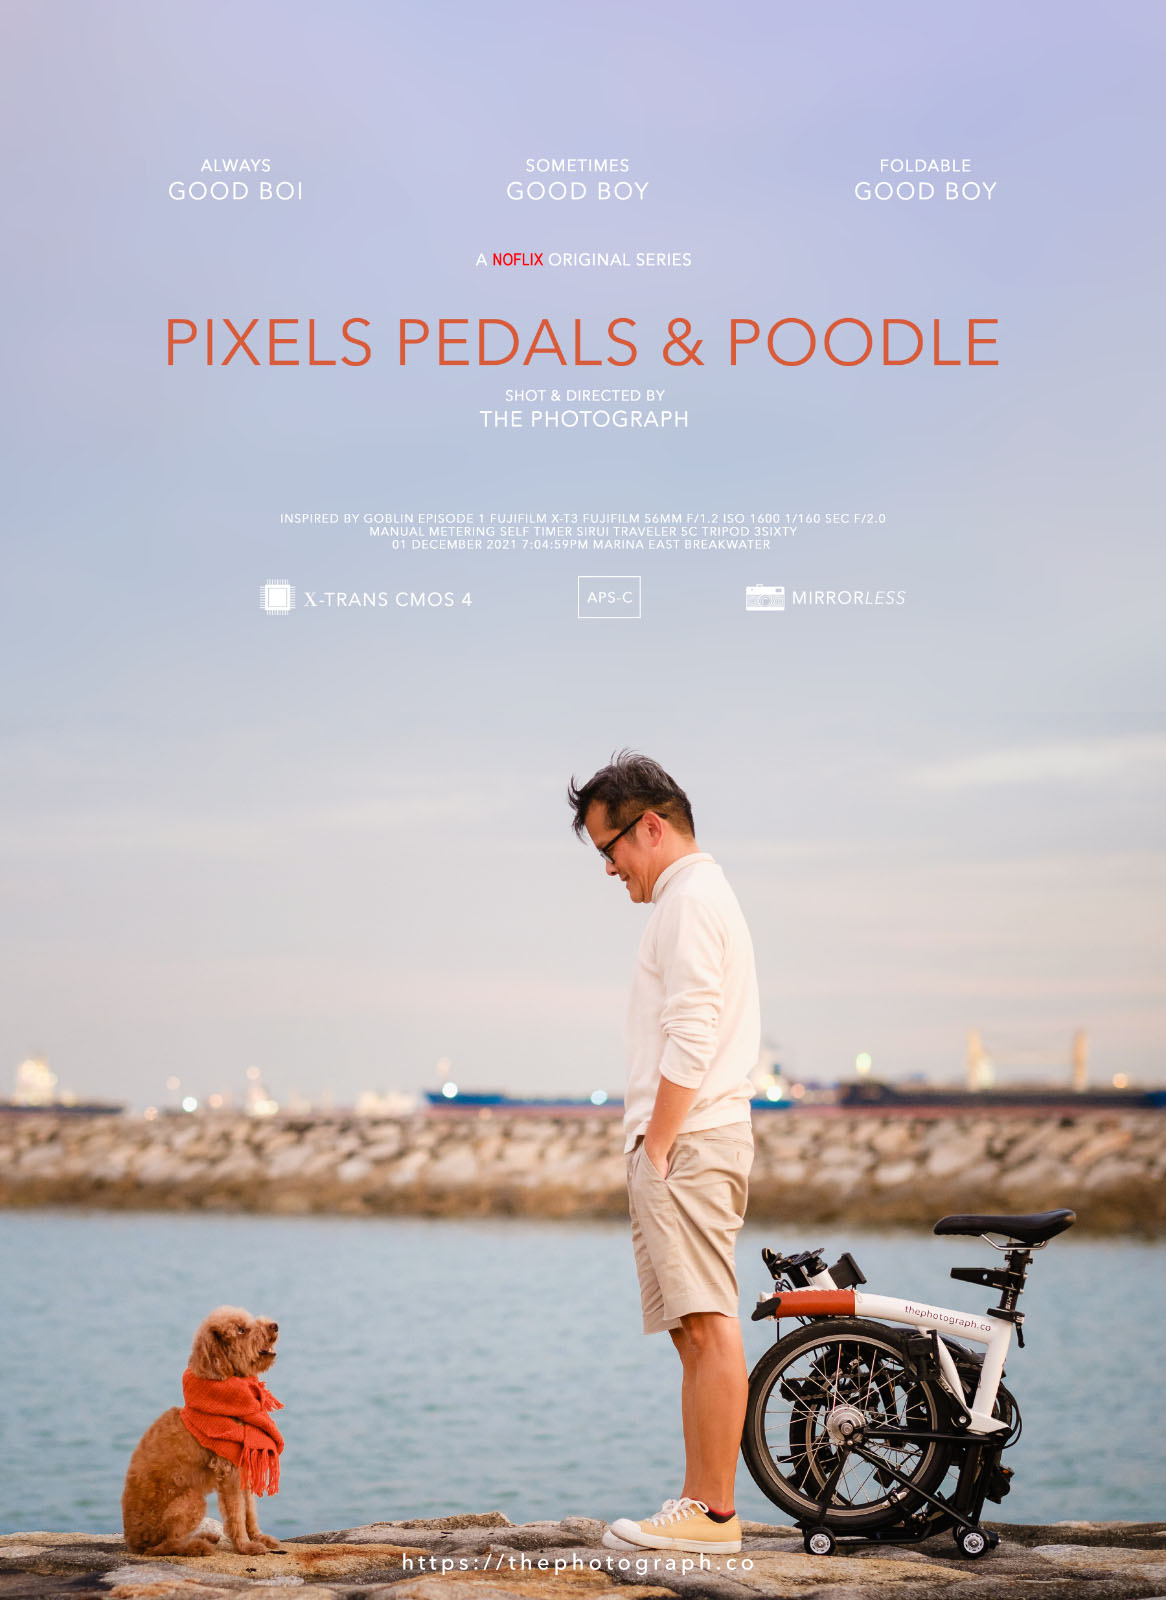 Goblin-inspired movie poster by Hendra Lauw Pixels Pedals and Poodle